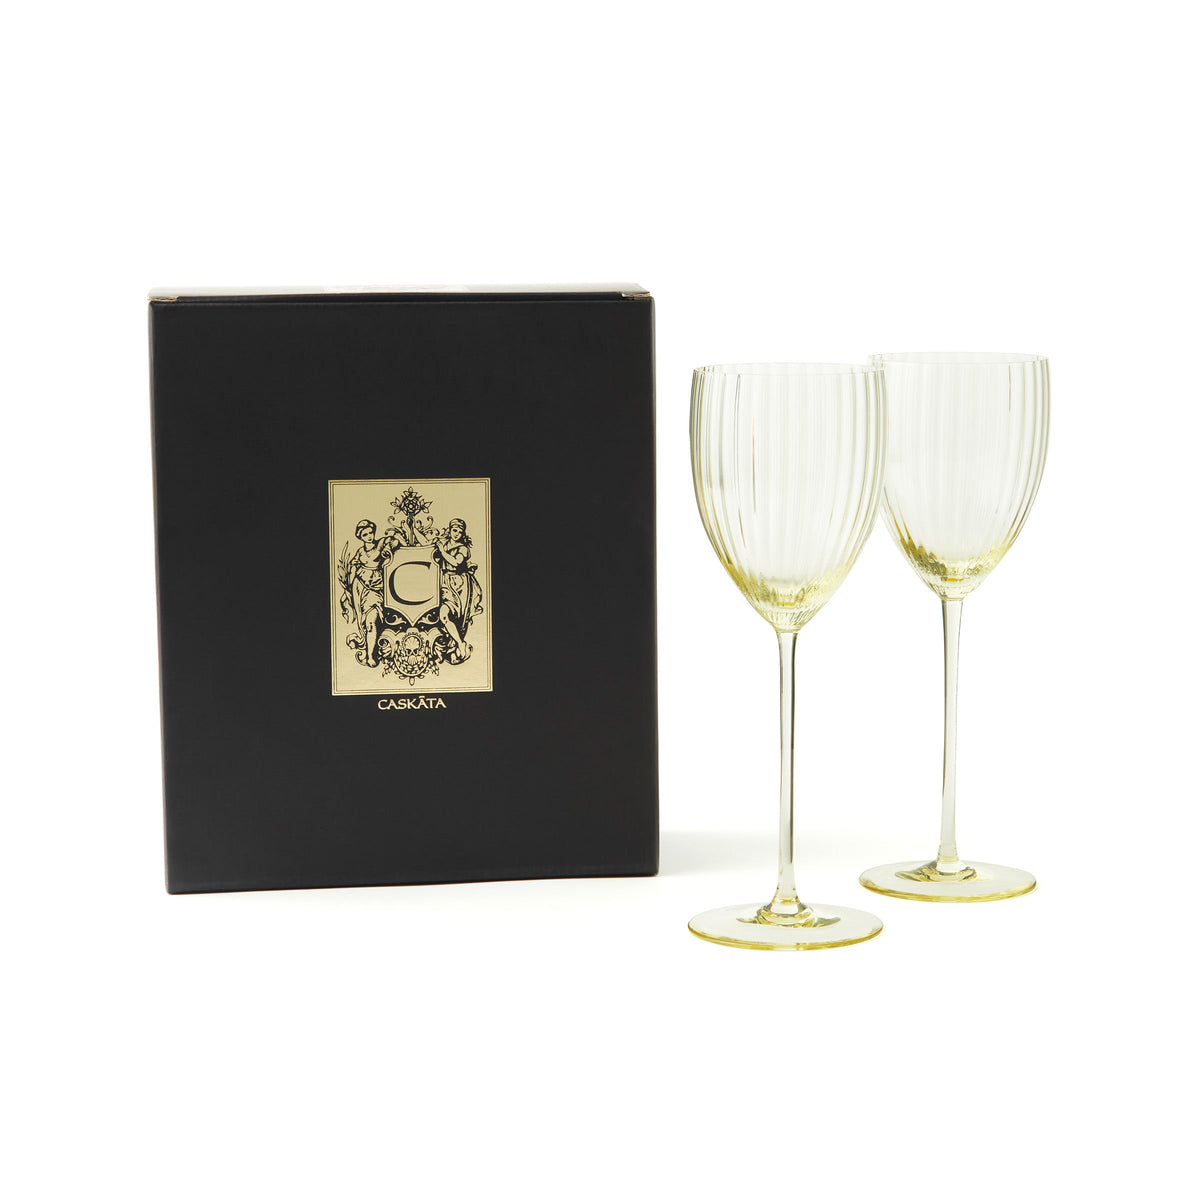 Quinn citrine yellow mouth-blown crystal white wine glasses from Caskata in a black and gold gift box.